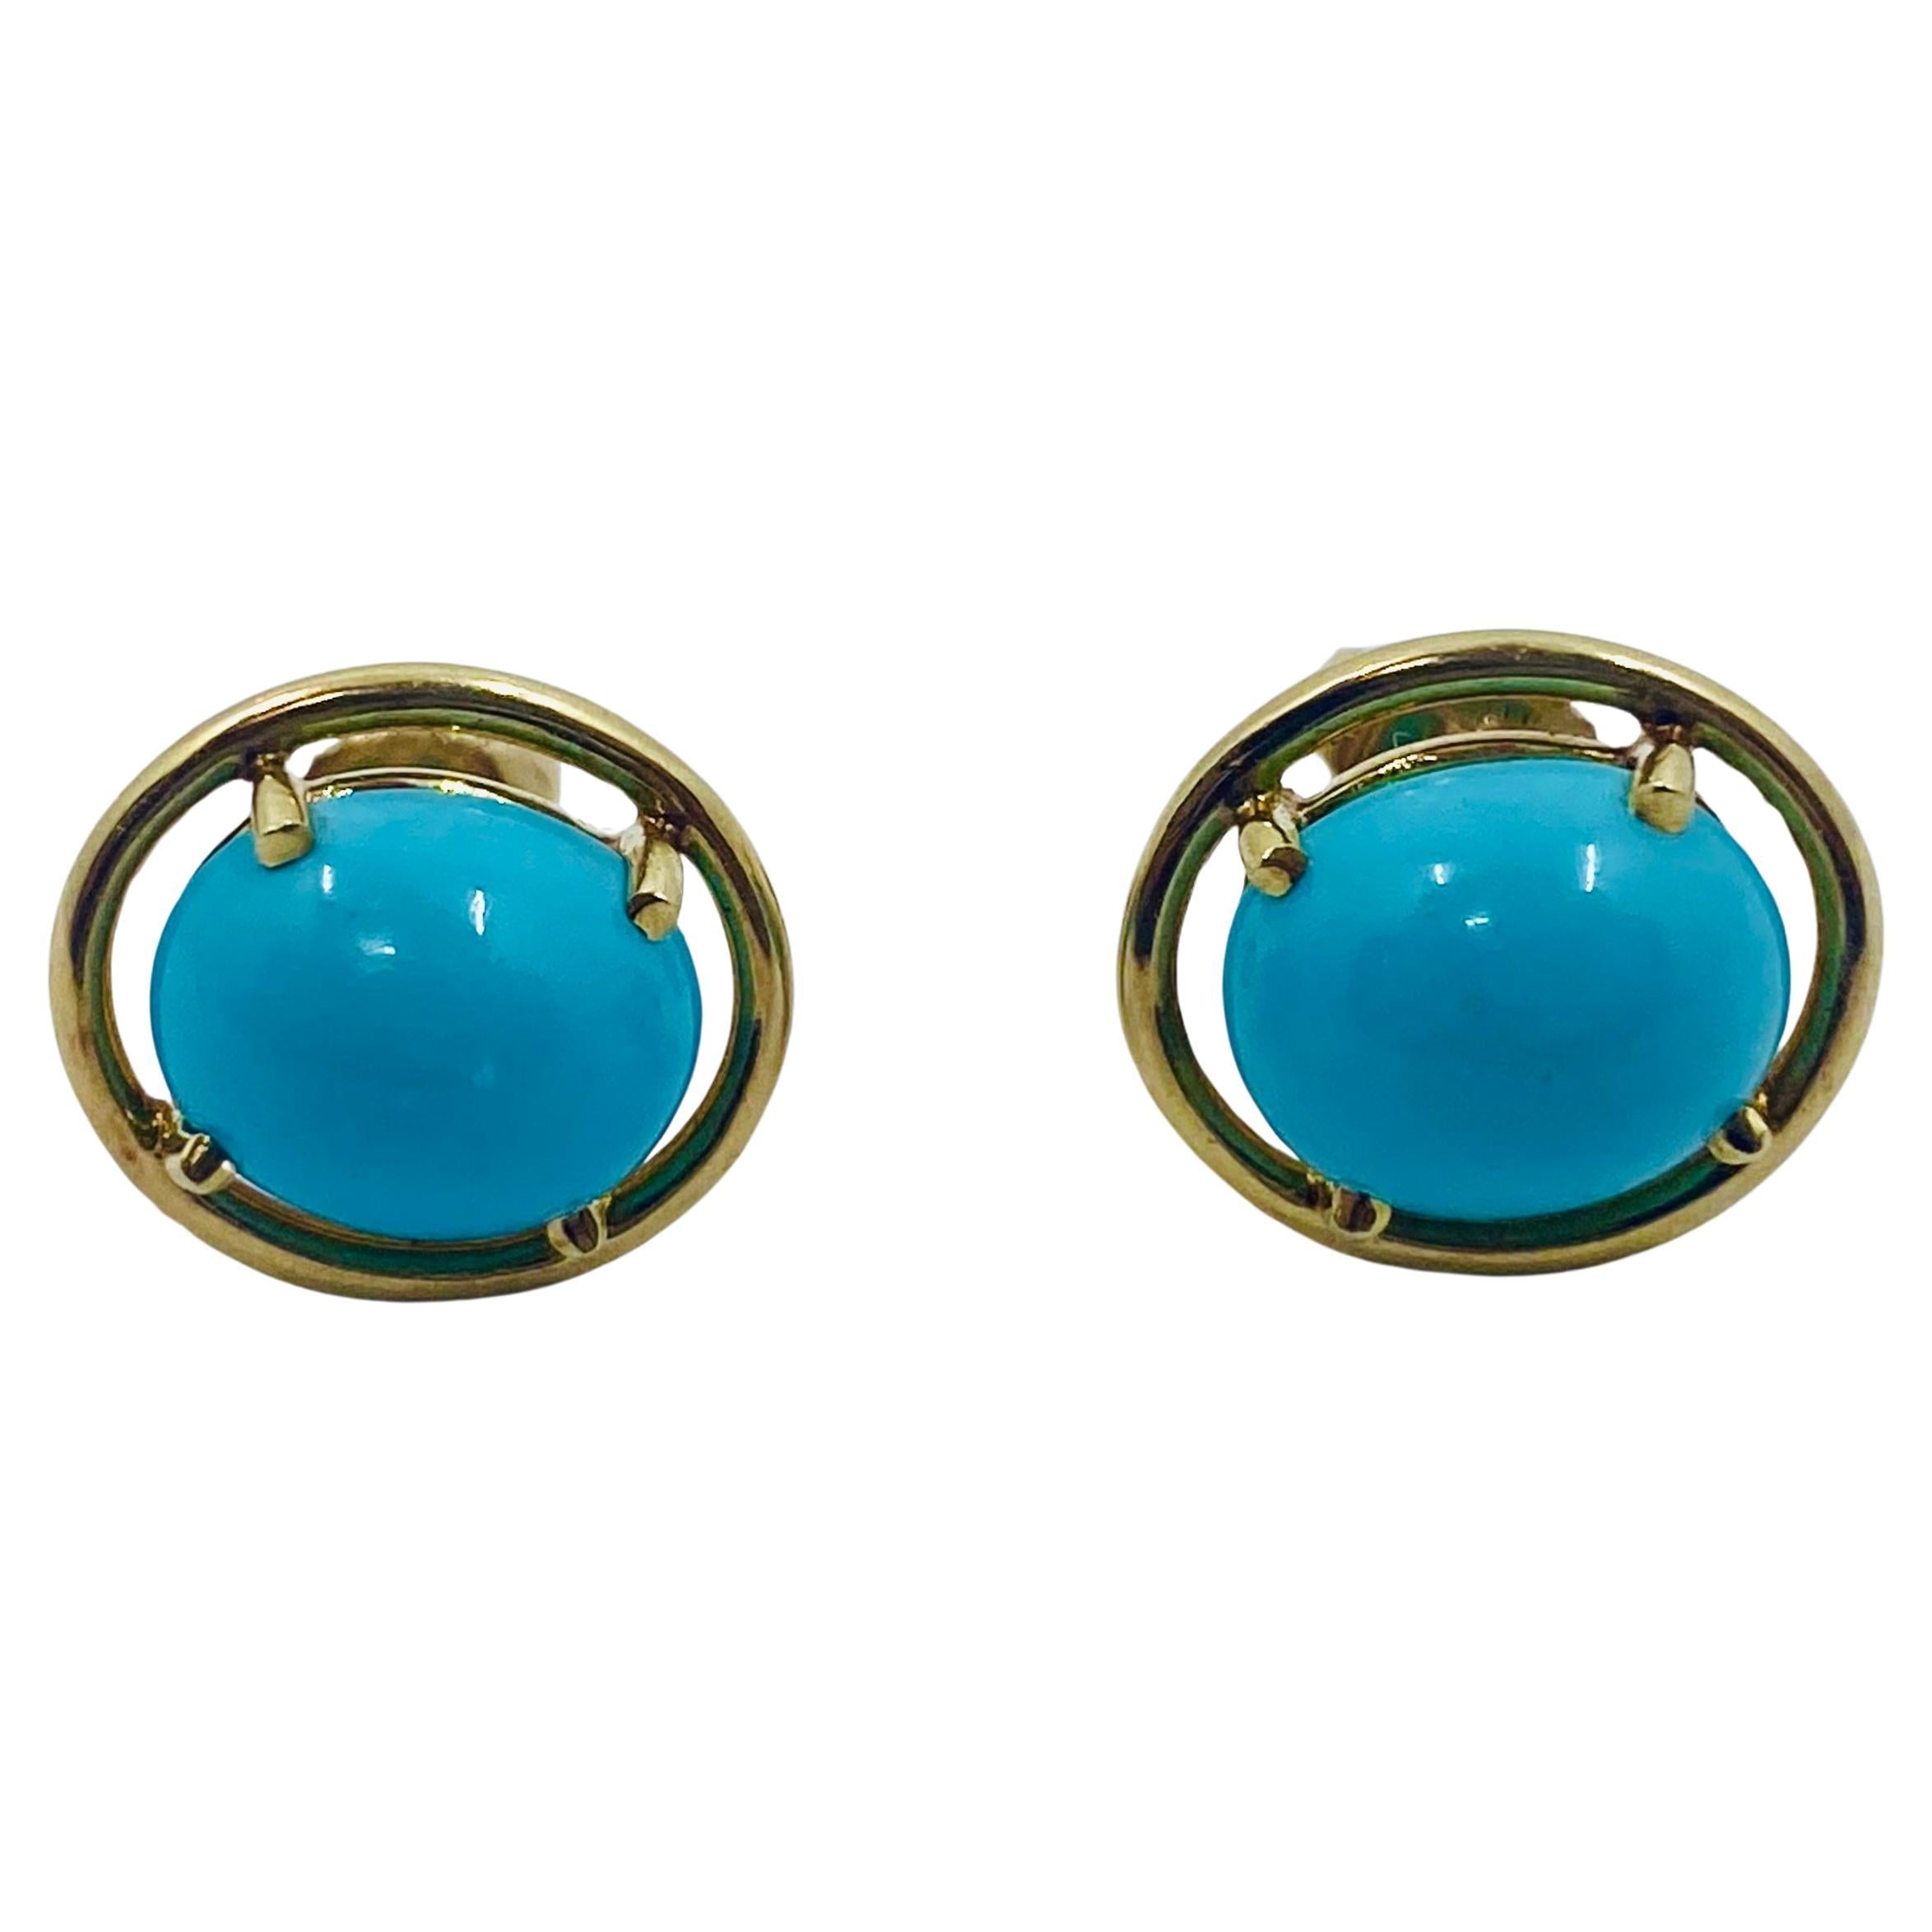 Tiffany & Co. Turquoise Earrings 14k Gold In Good Condition For Sale In Beverly Hills, CA